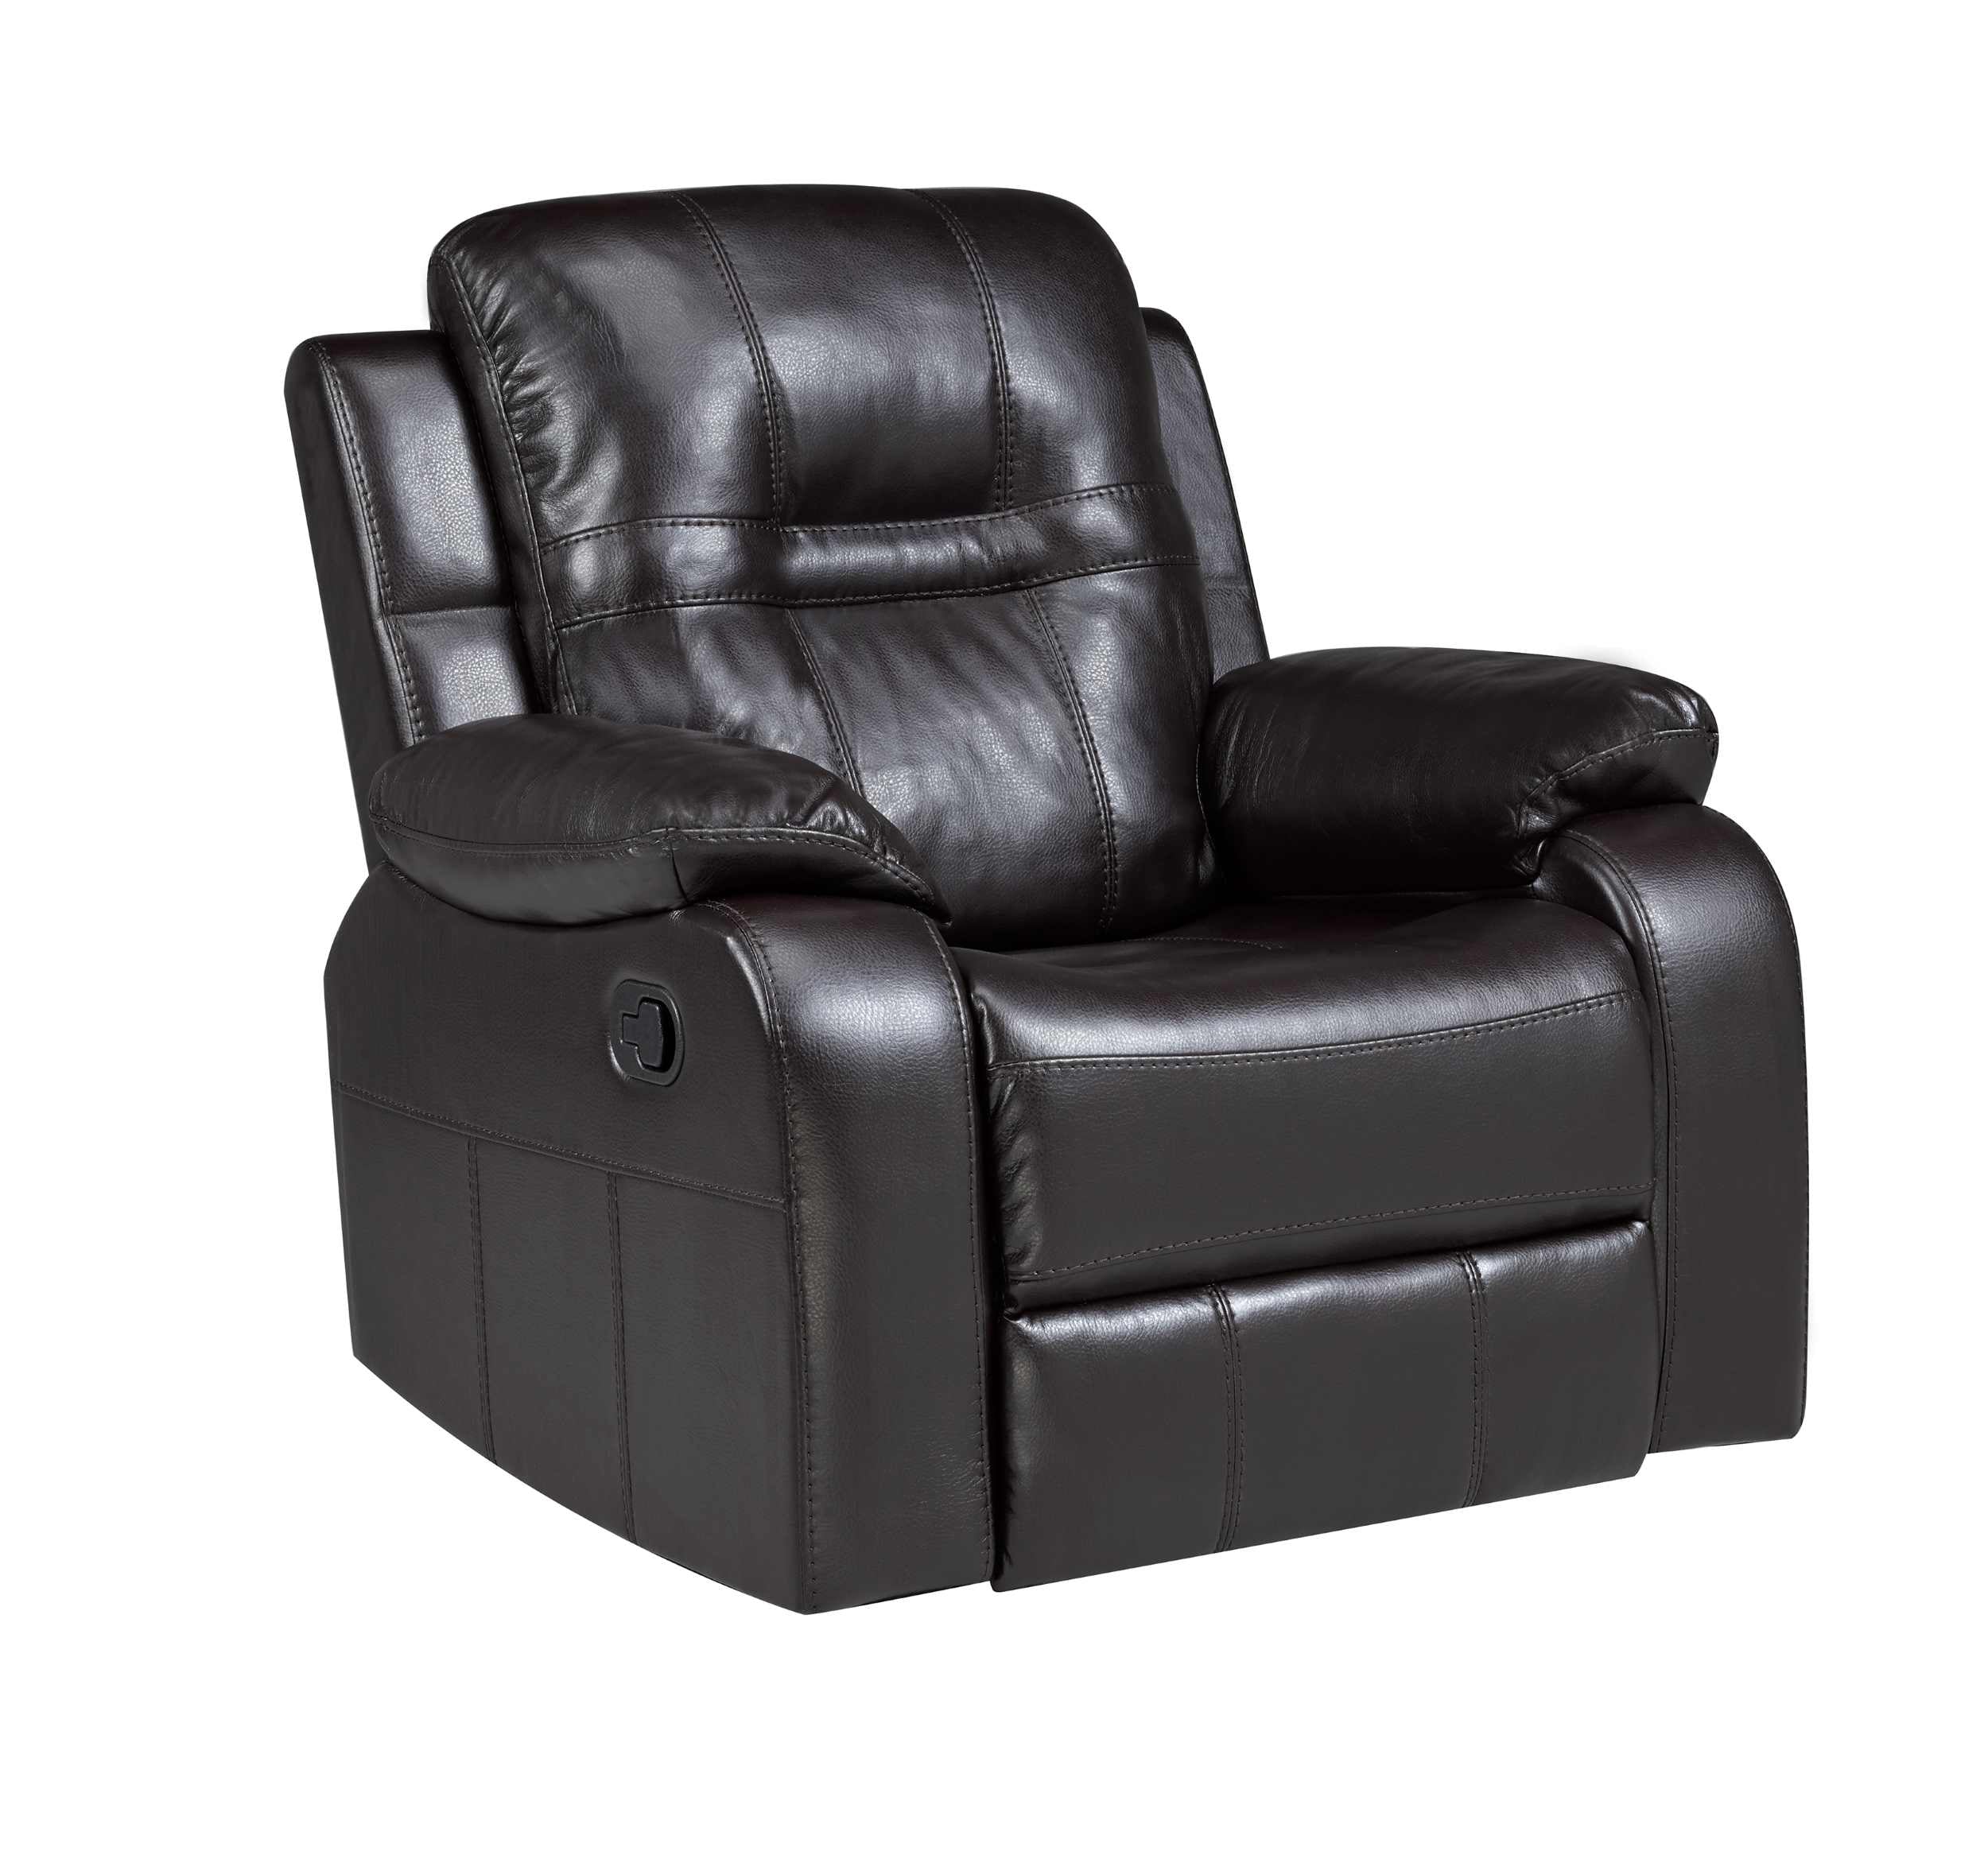 Napolean Air Leather Chocolate Recliner Collection 6015